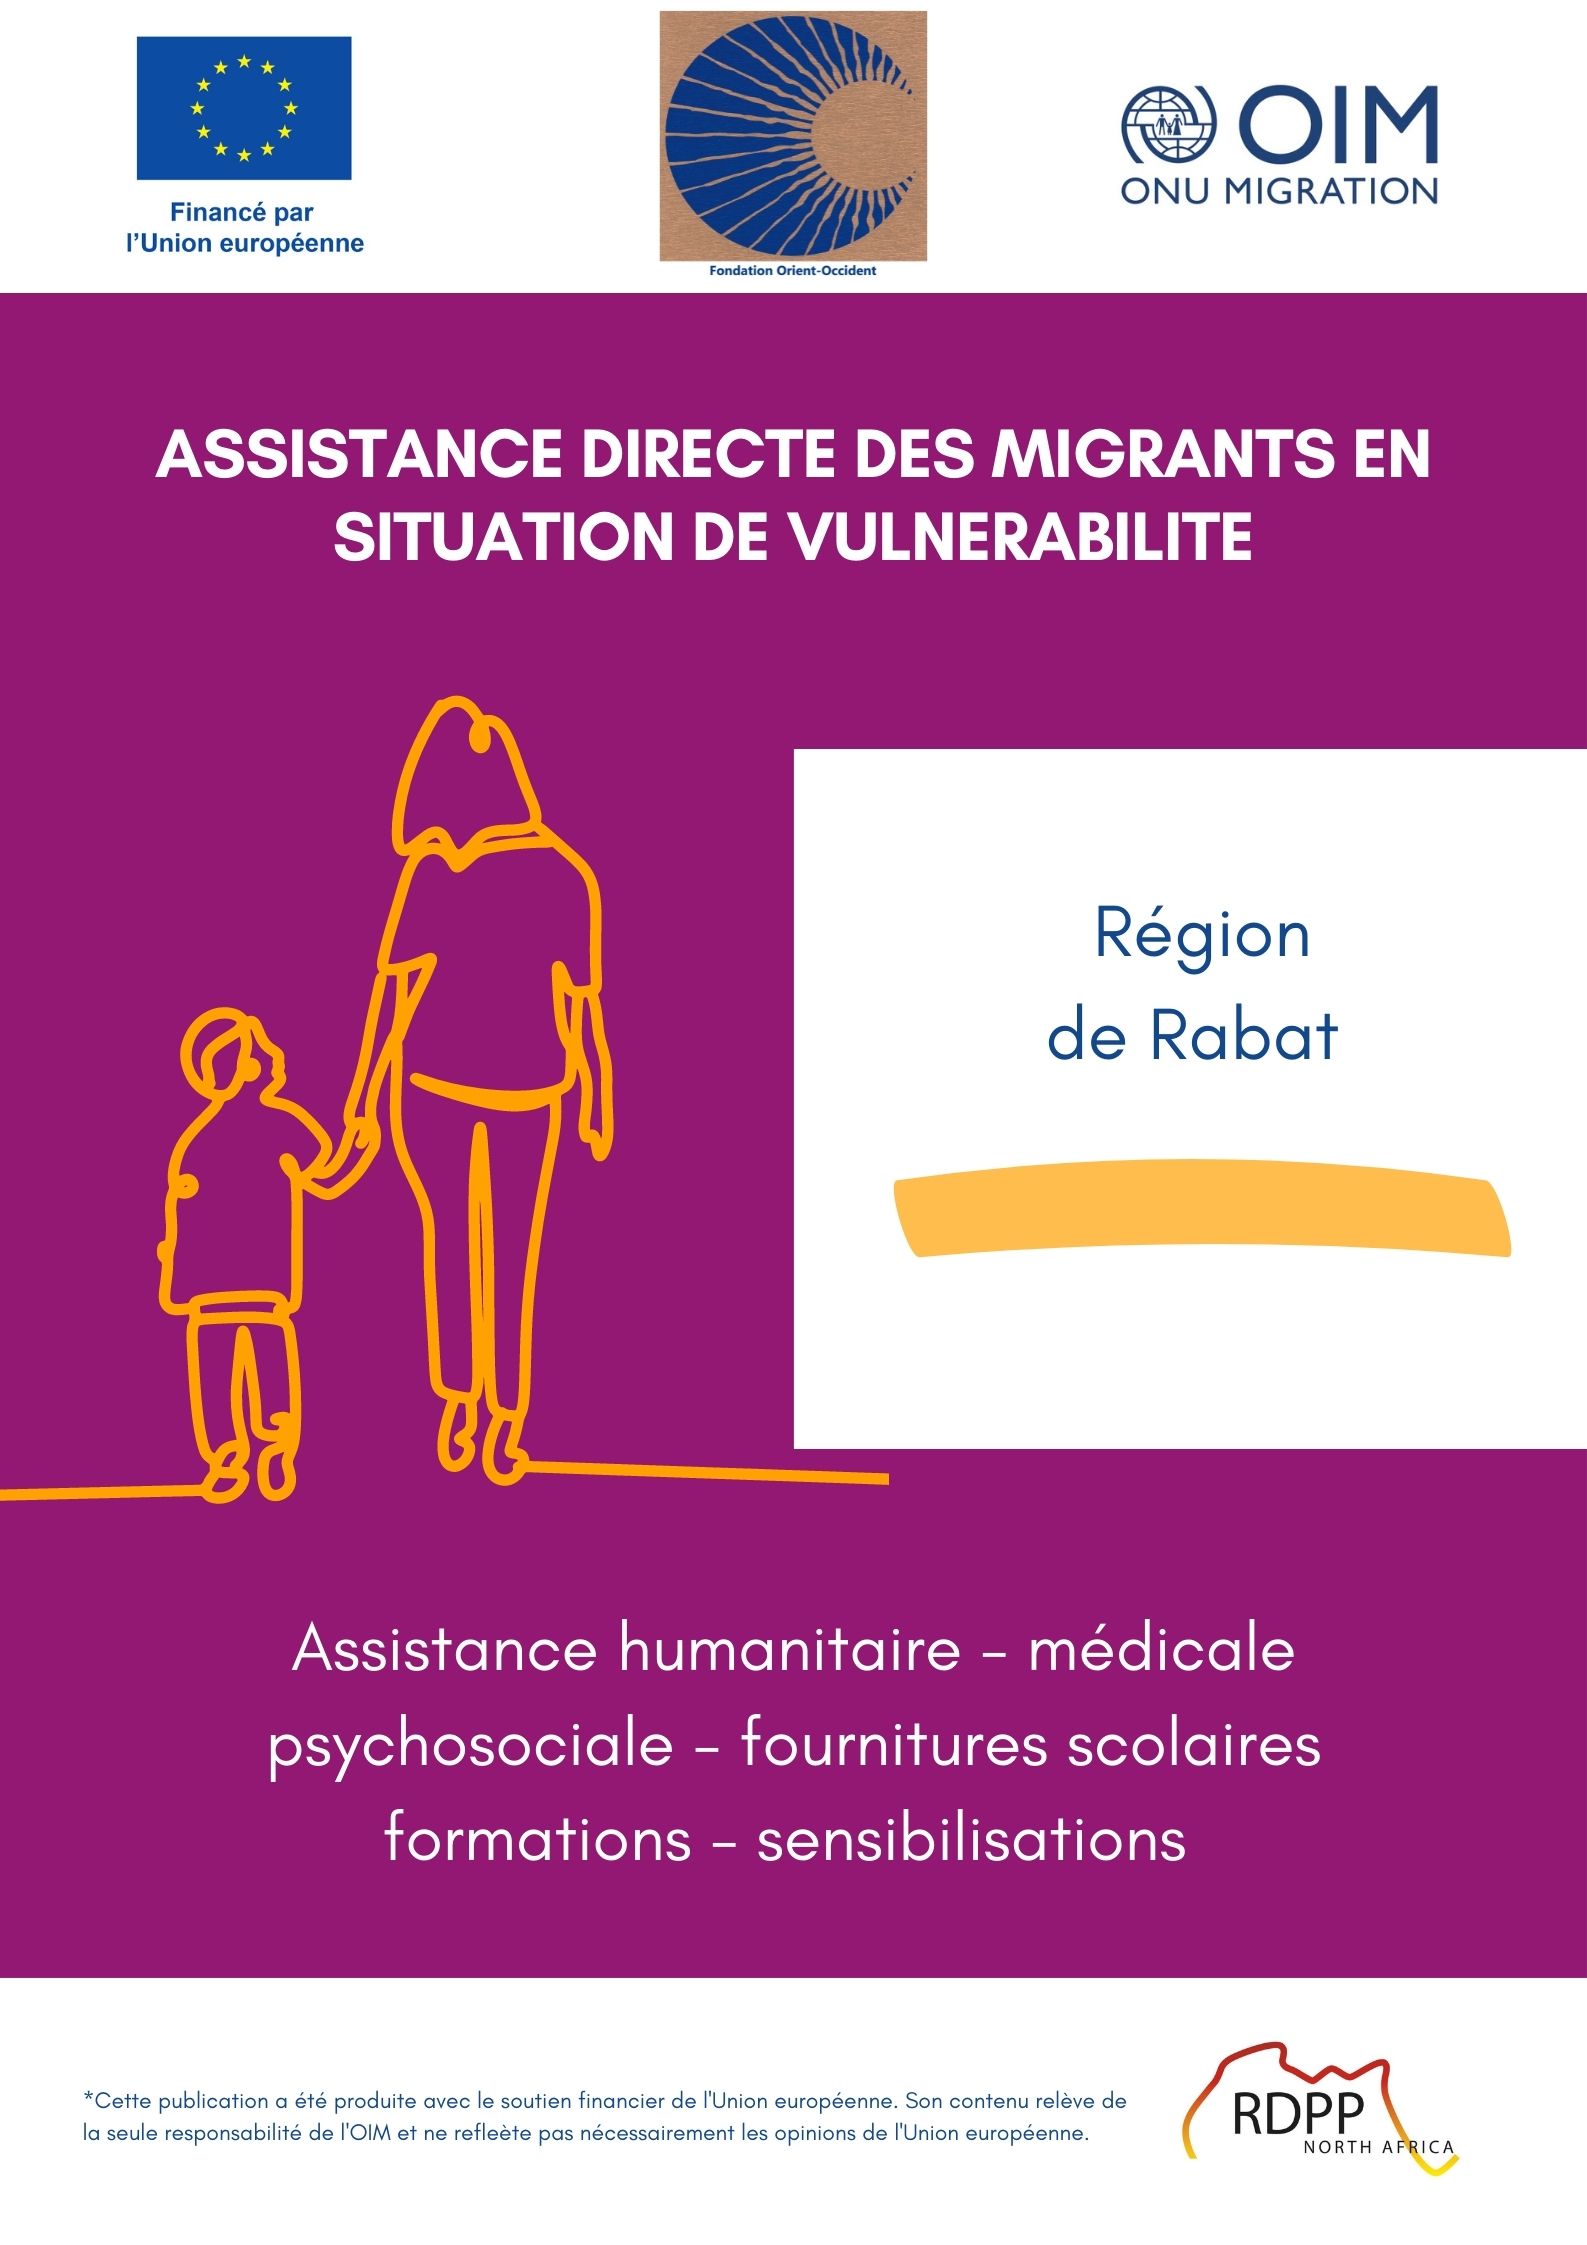 New project in partnership with IOM Morocco